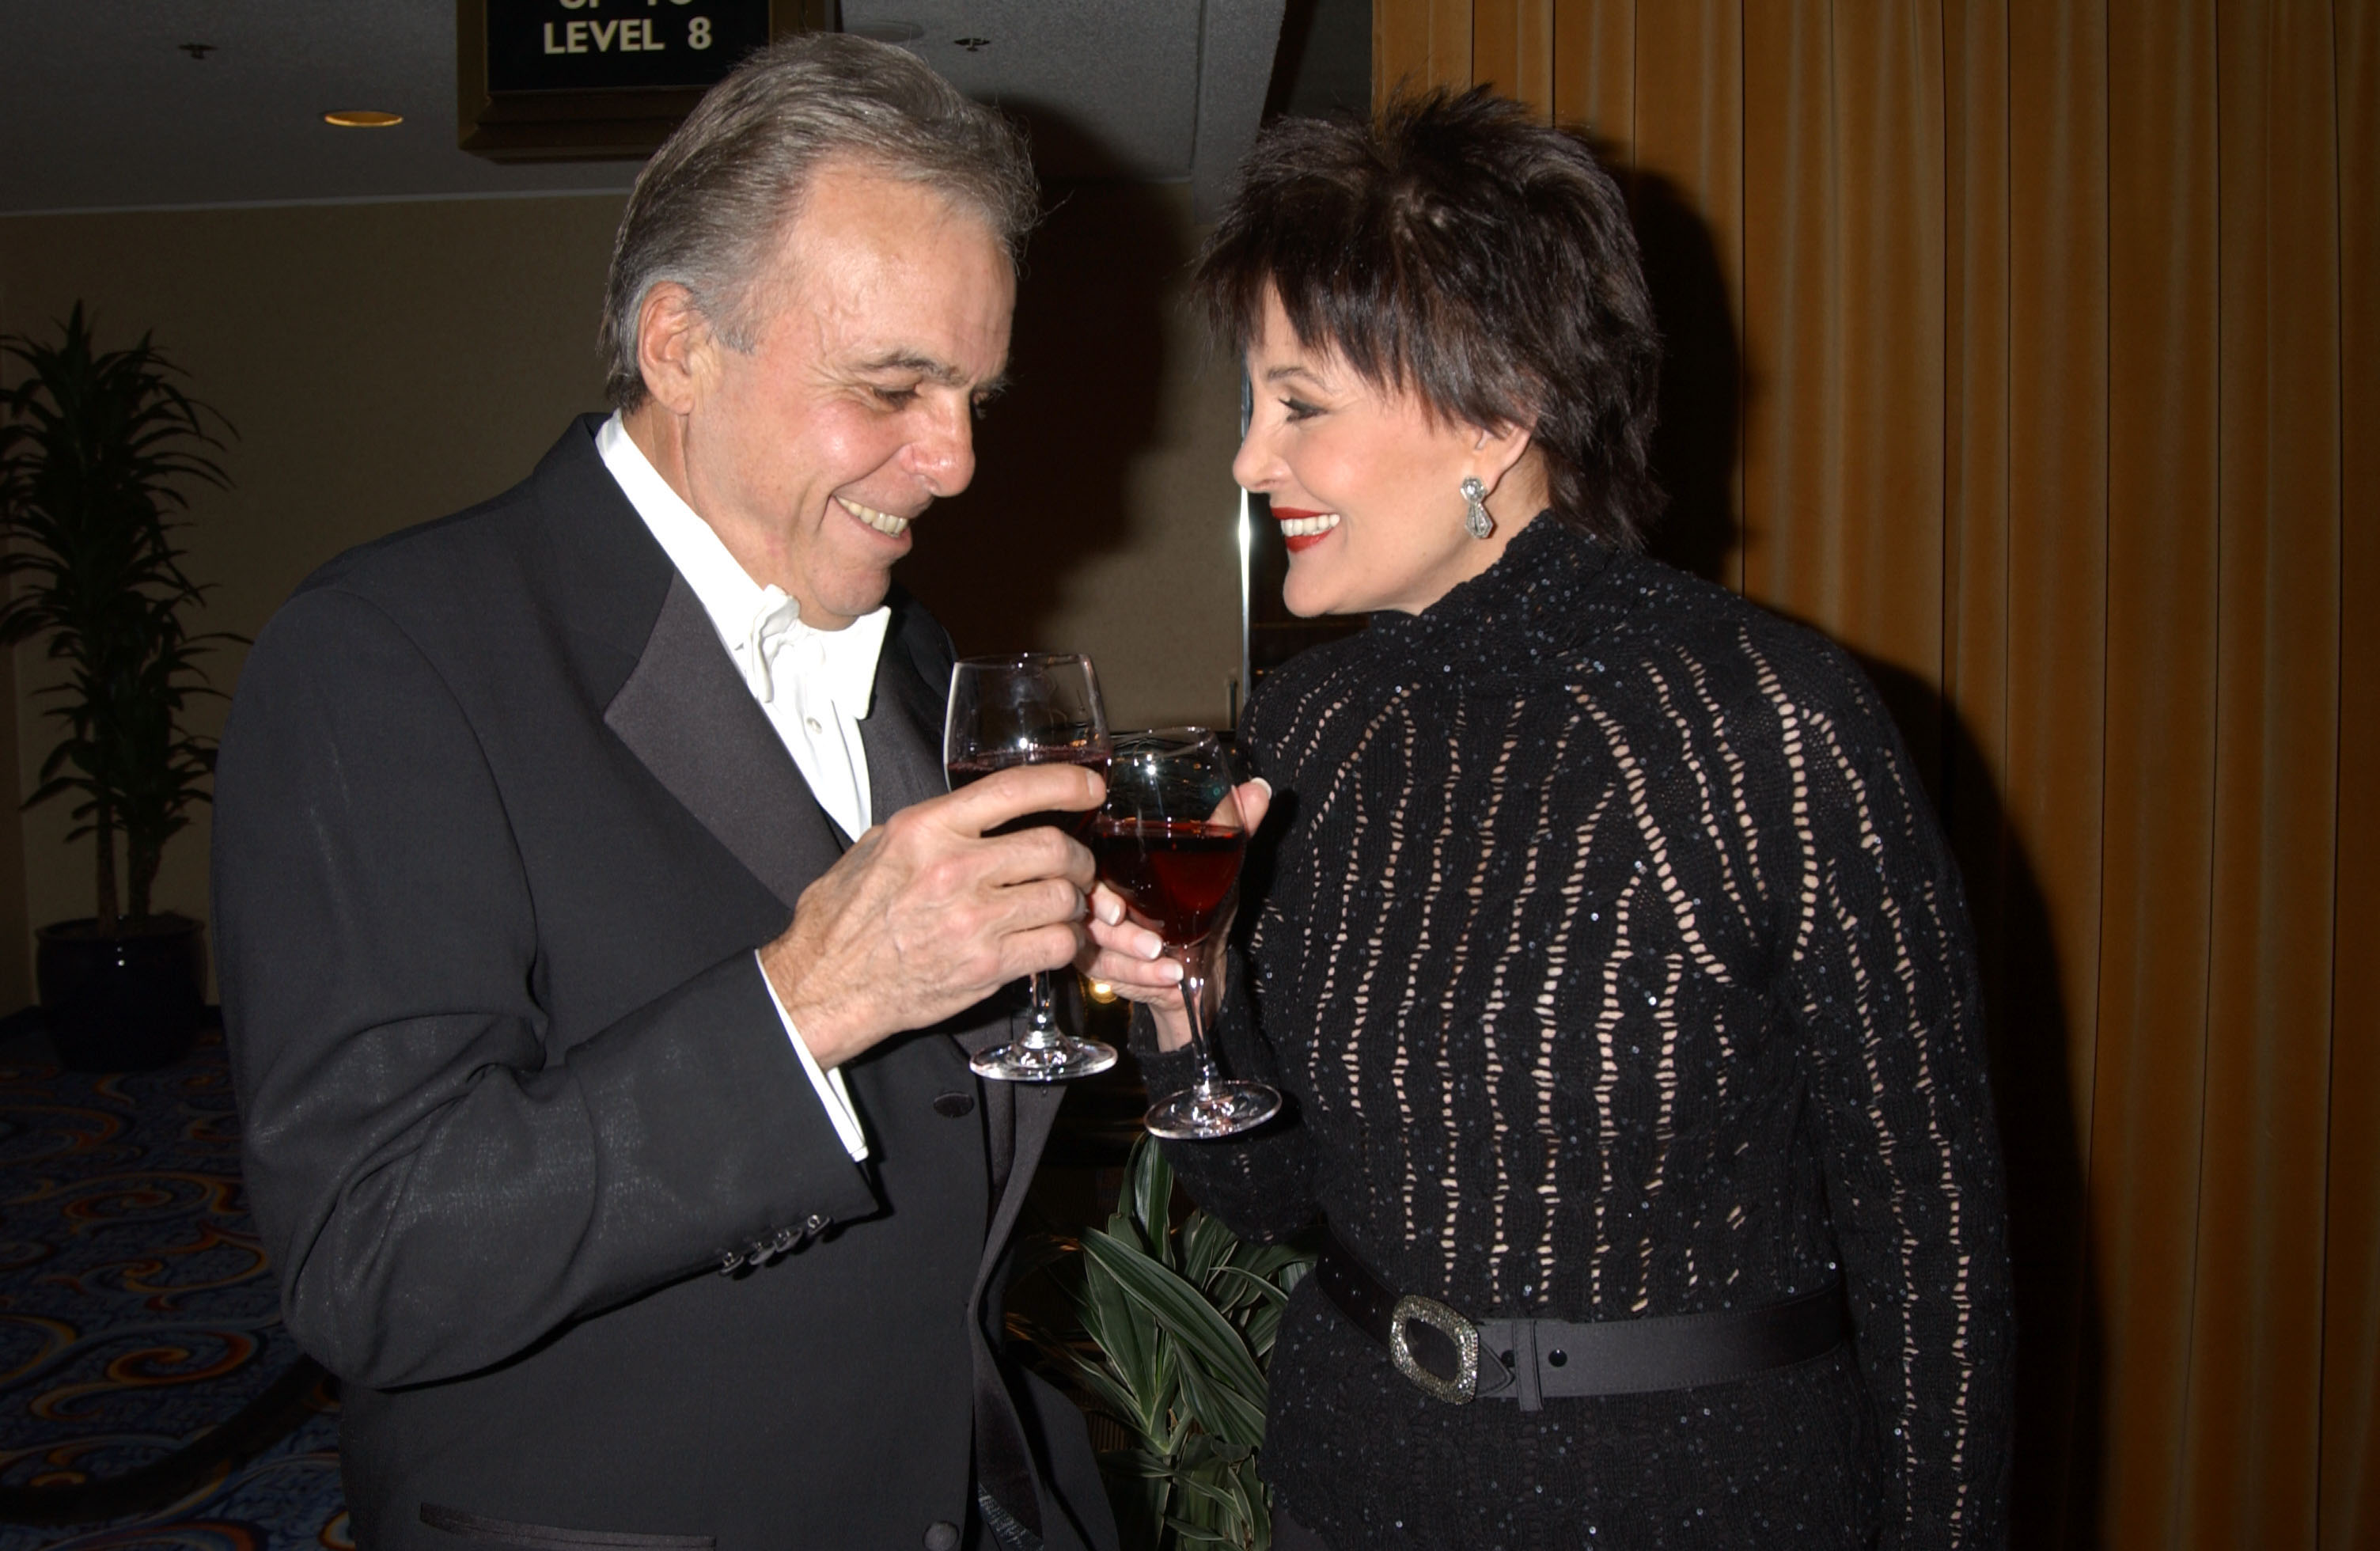 Linda Dano and her husband Frank Attardi in New York in 2003 | Source: Getty Images